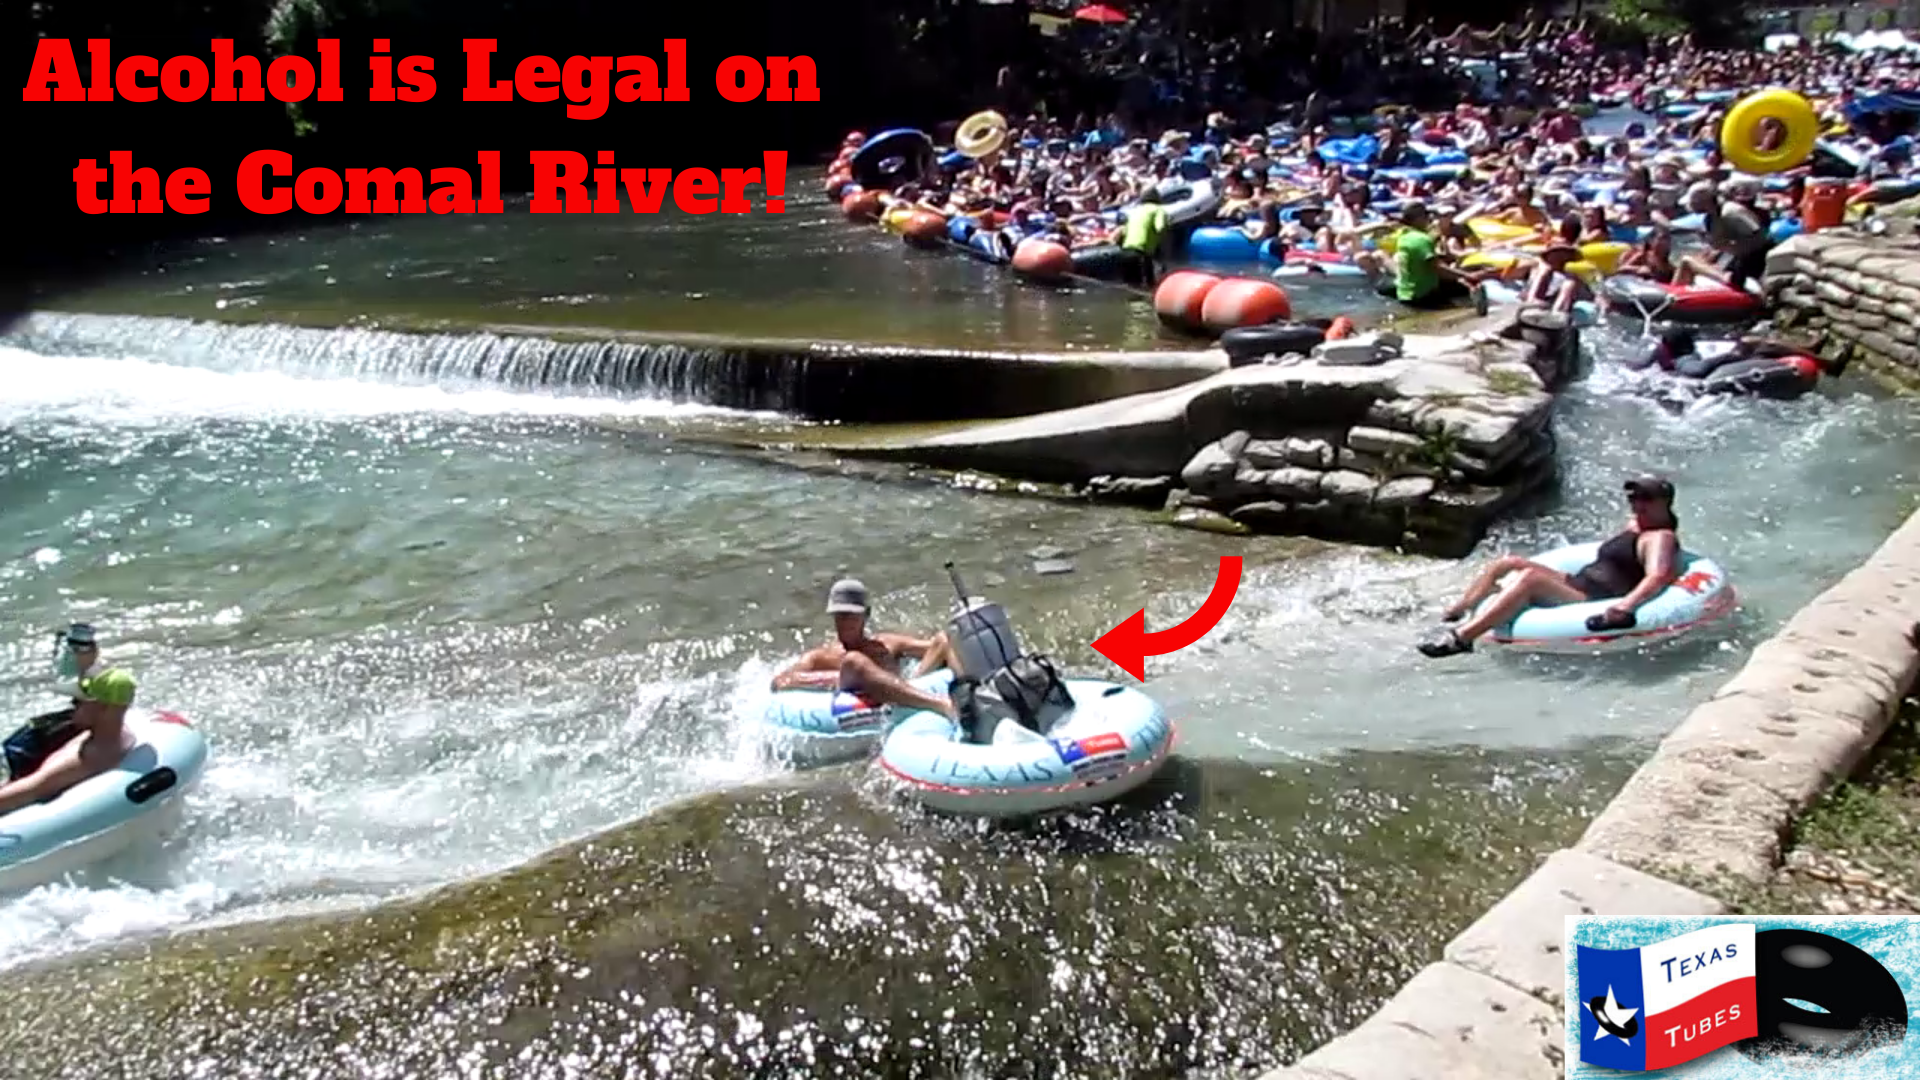 A keg of beer is legal and allowed on the Comal River at Texas Tubes